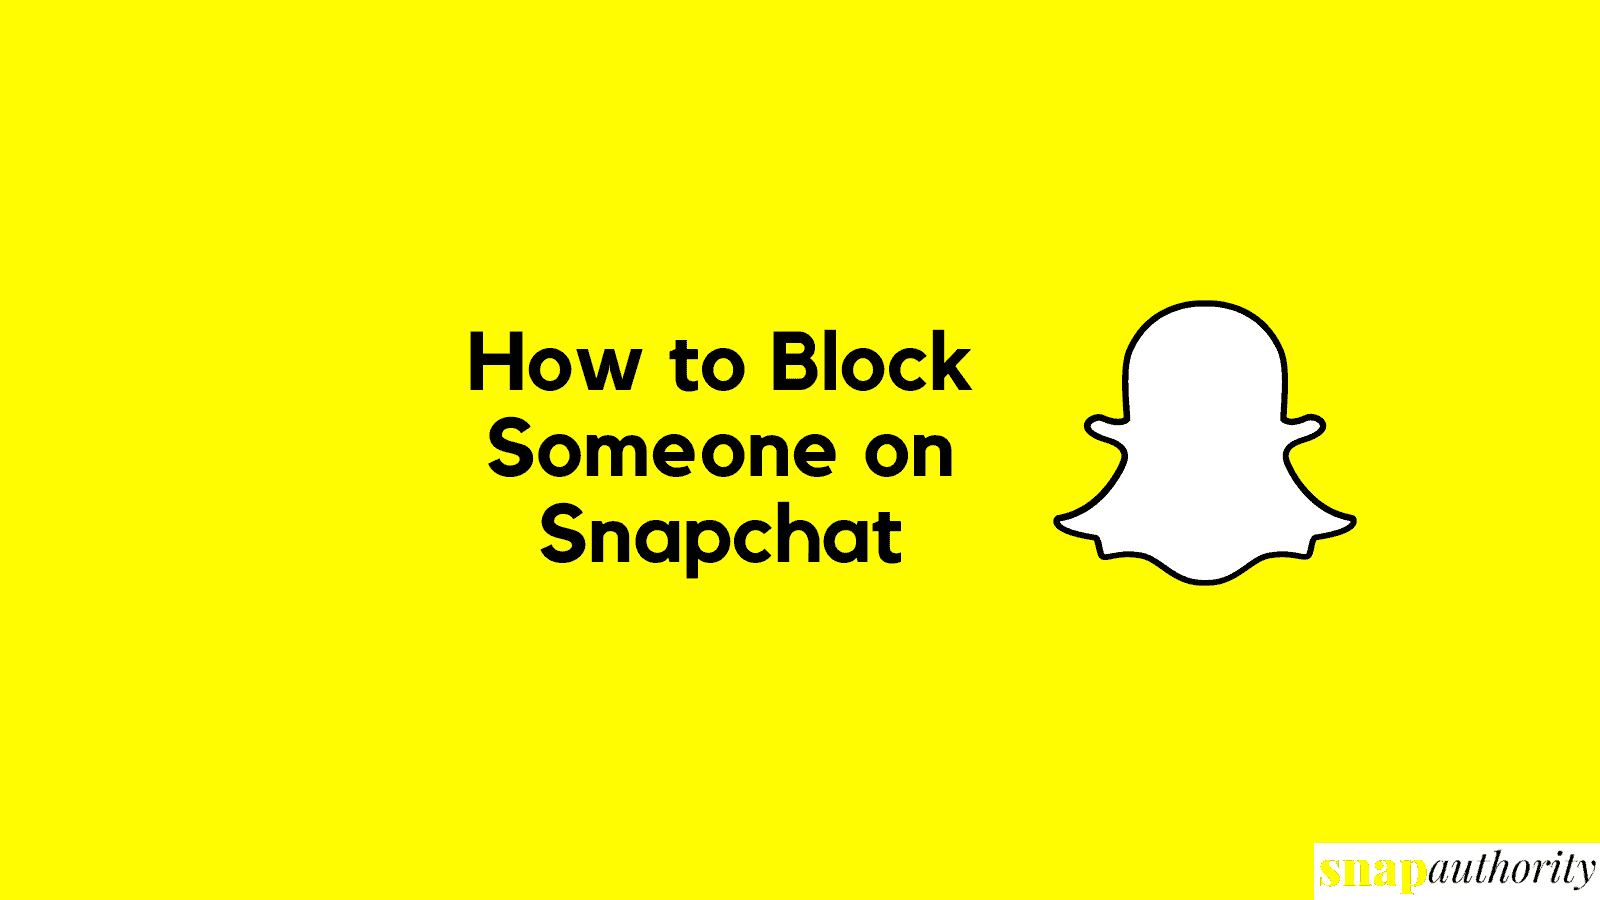 How to Block a person on Snapchat